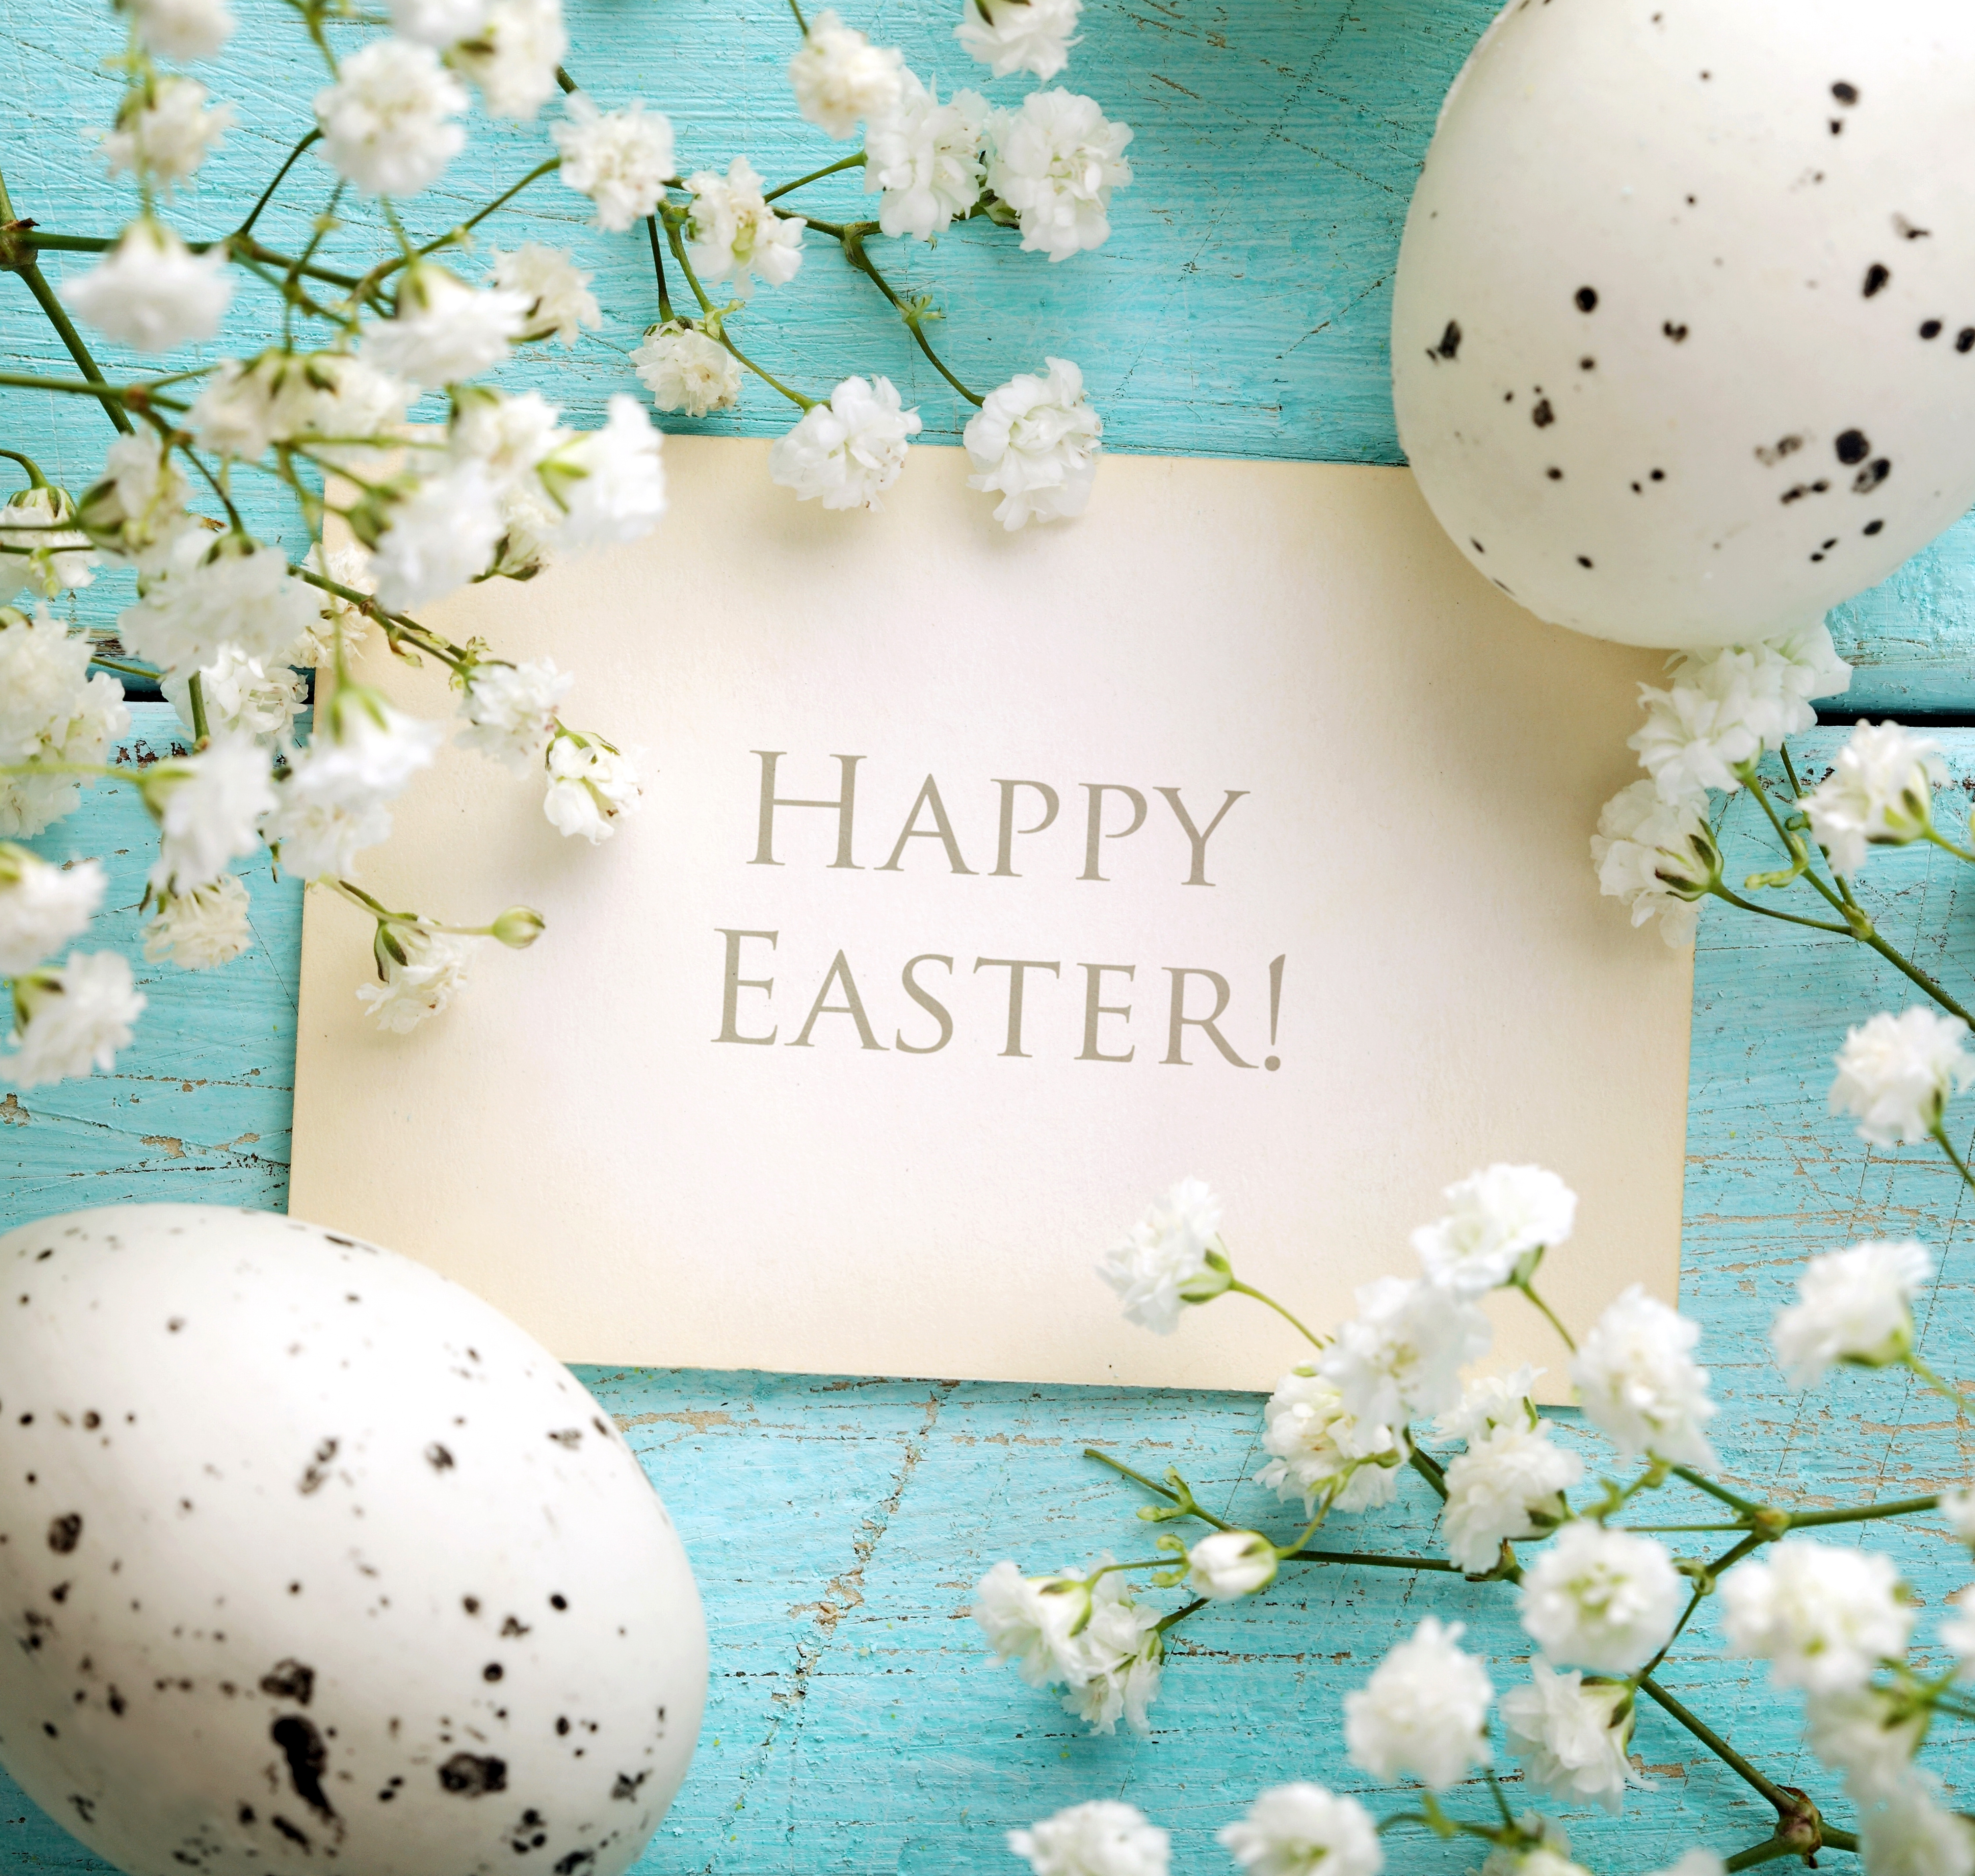 Happy Easter Images For Desktop Wallpapers Backgrounds Images